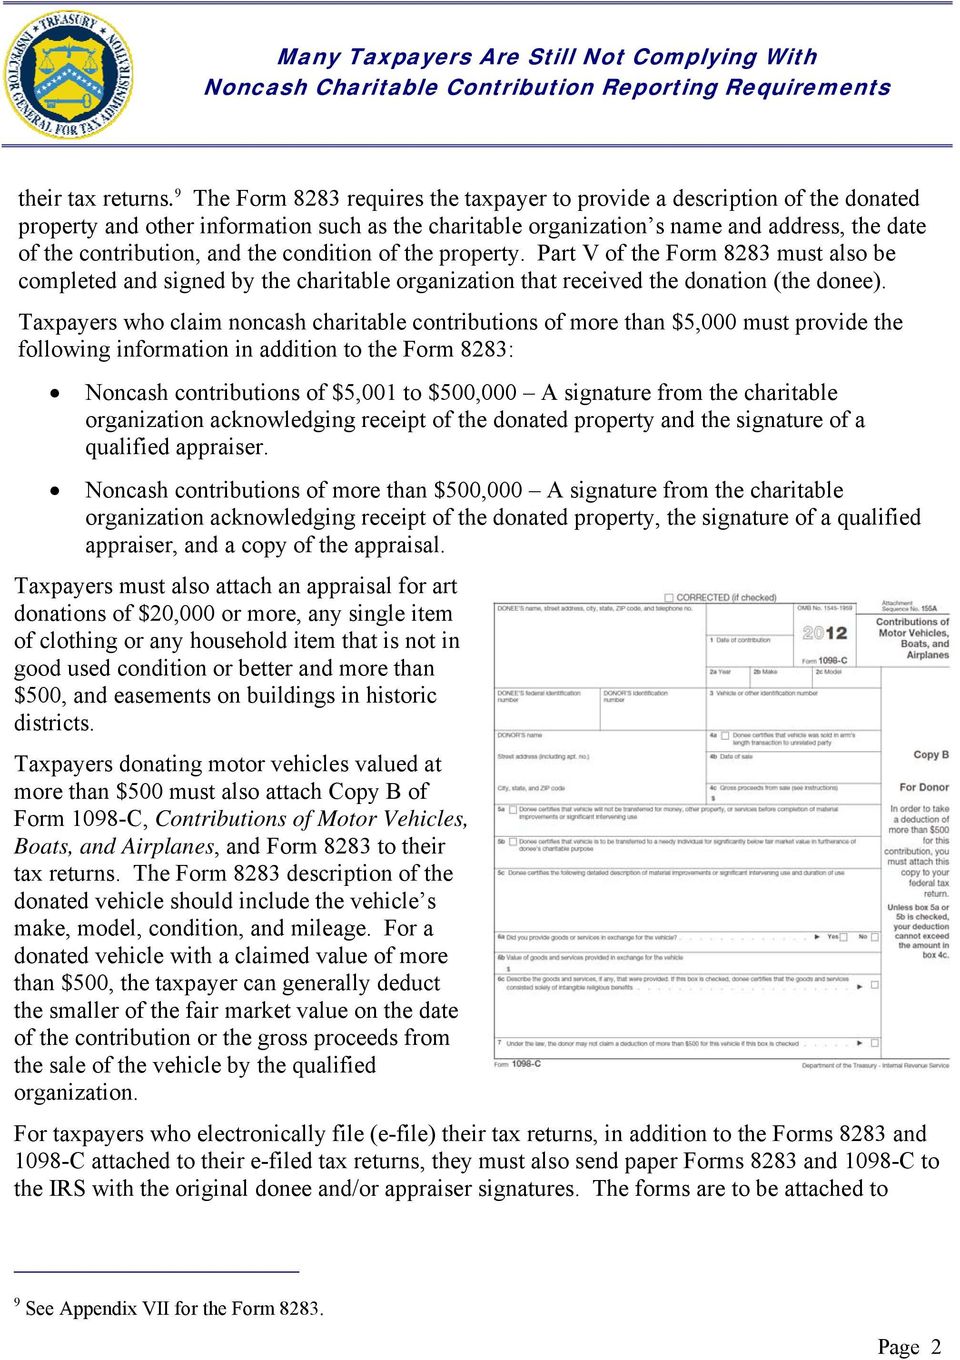 the condition of the property. Part V of the Form 8283 must also be completed and signed by the charitable organization that received the donation (the donee).